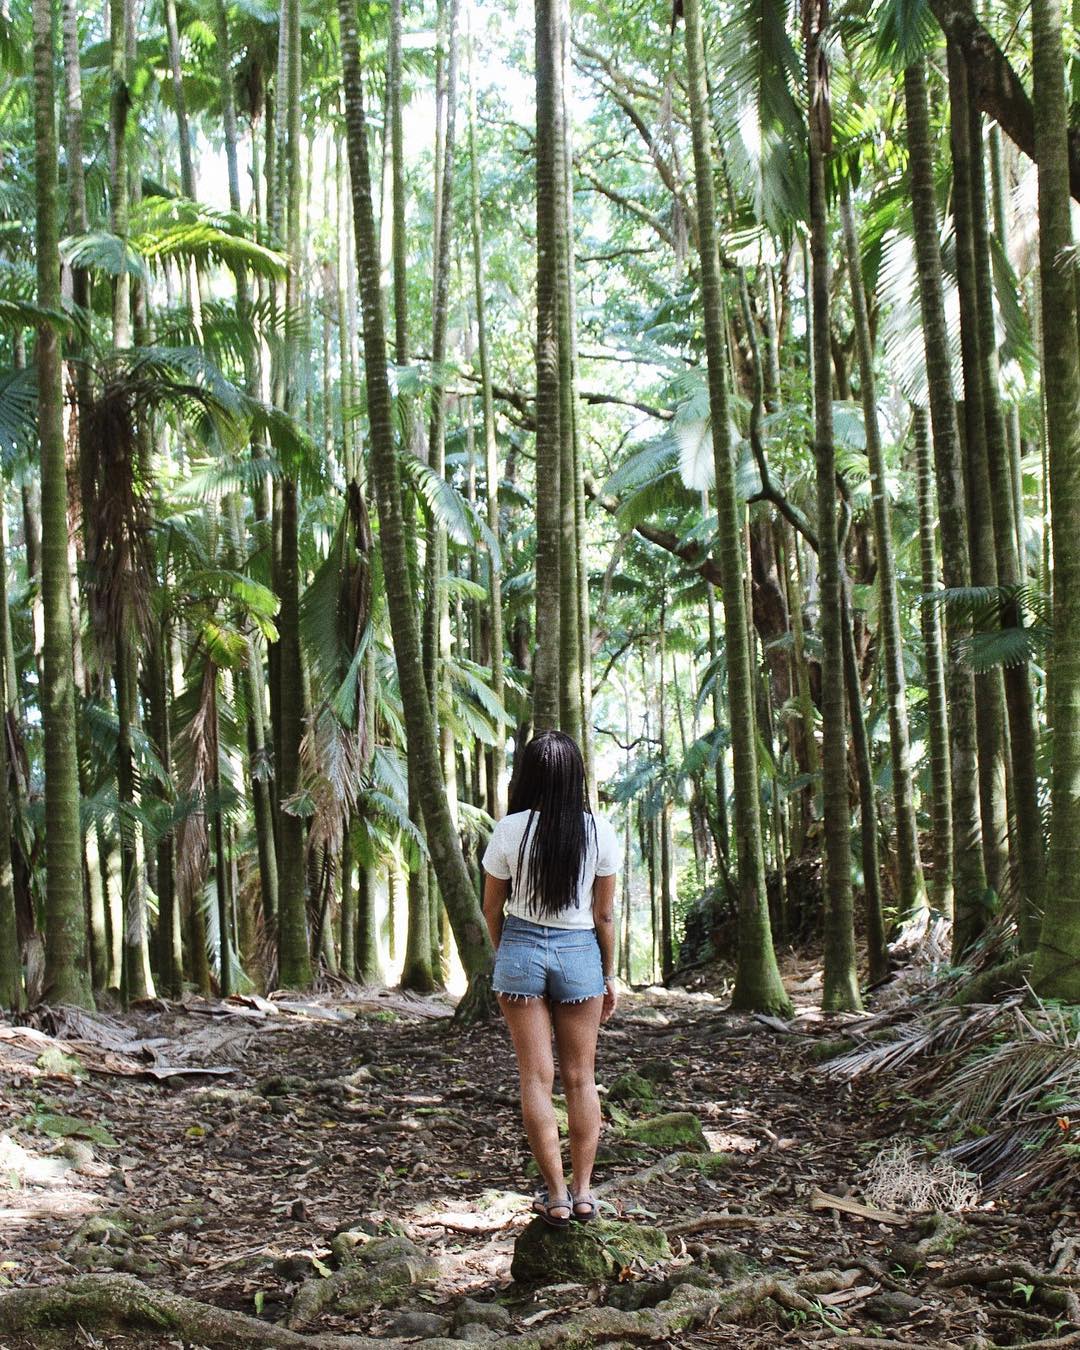 Forest in Pahoa, HI. Photo by Instagram user @greengirlleah